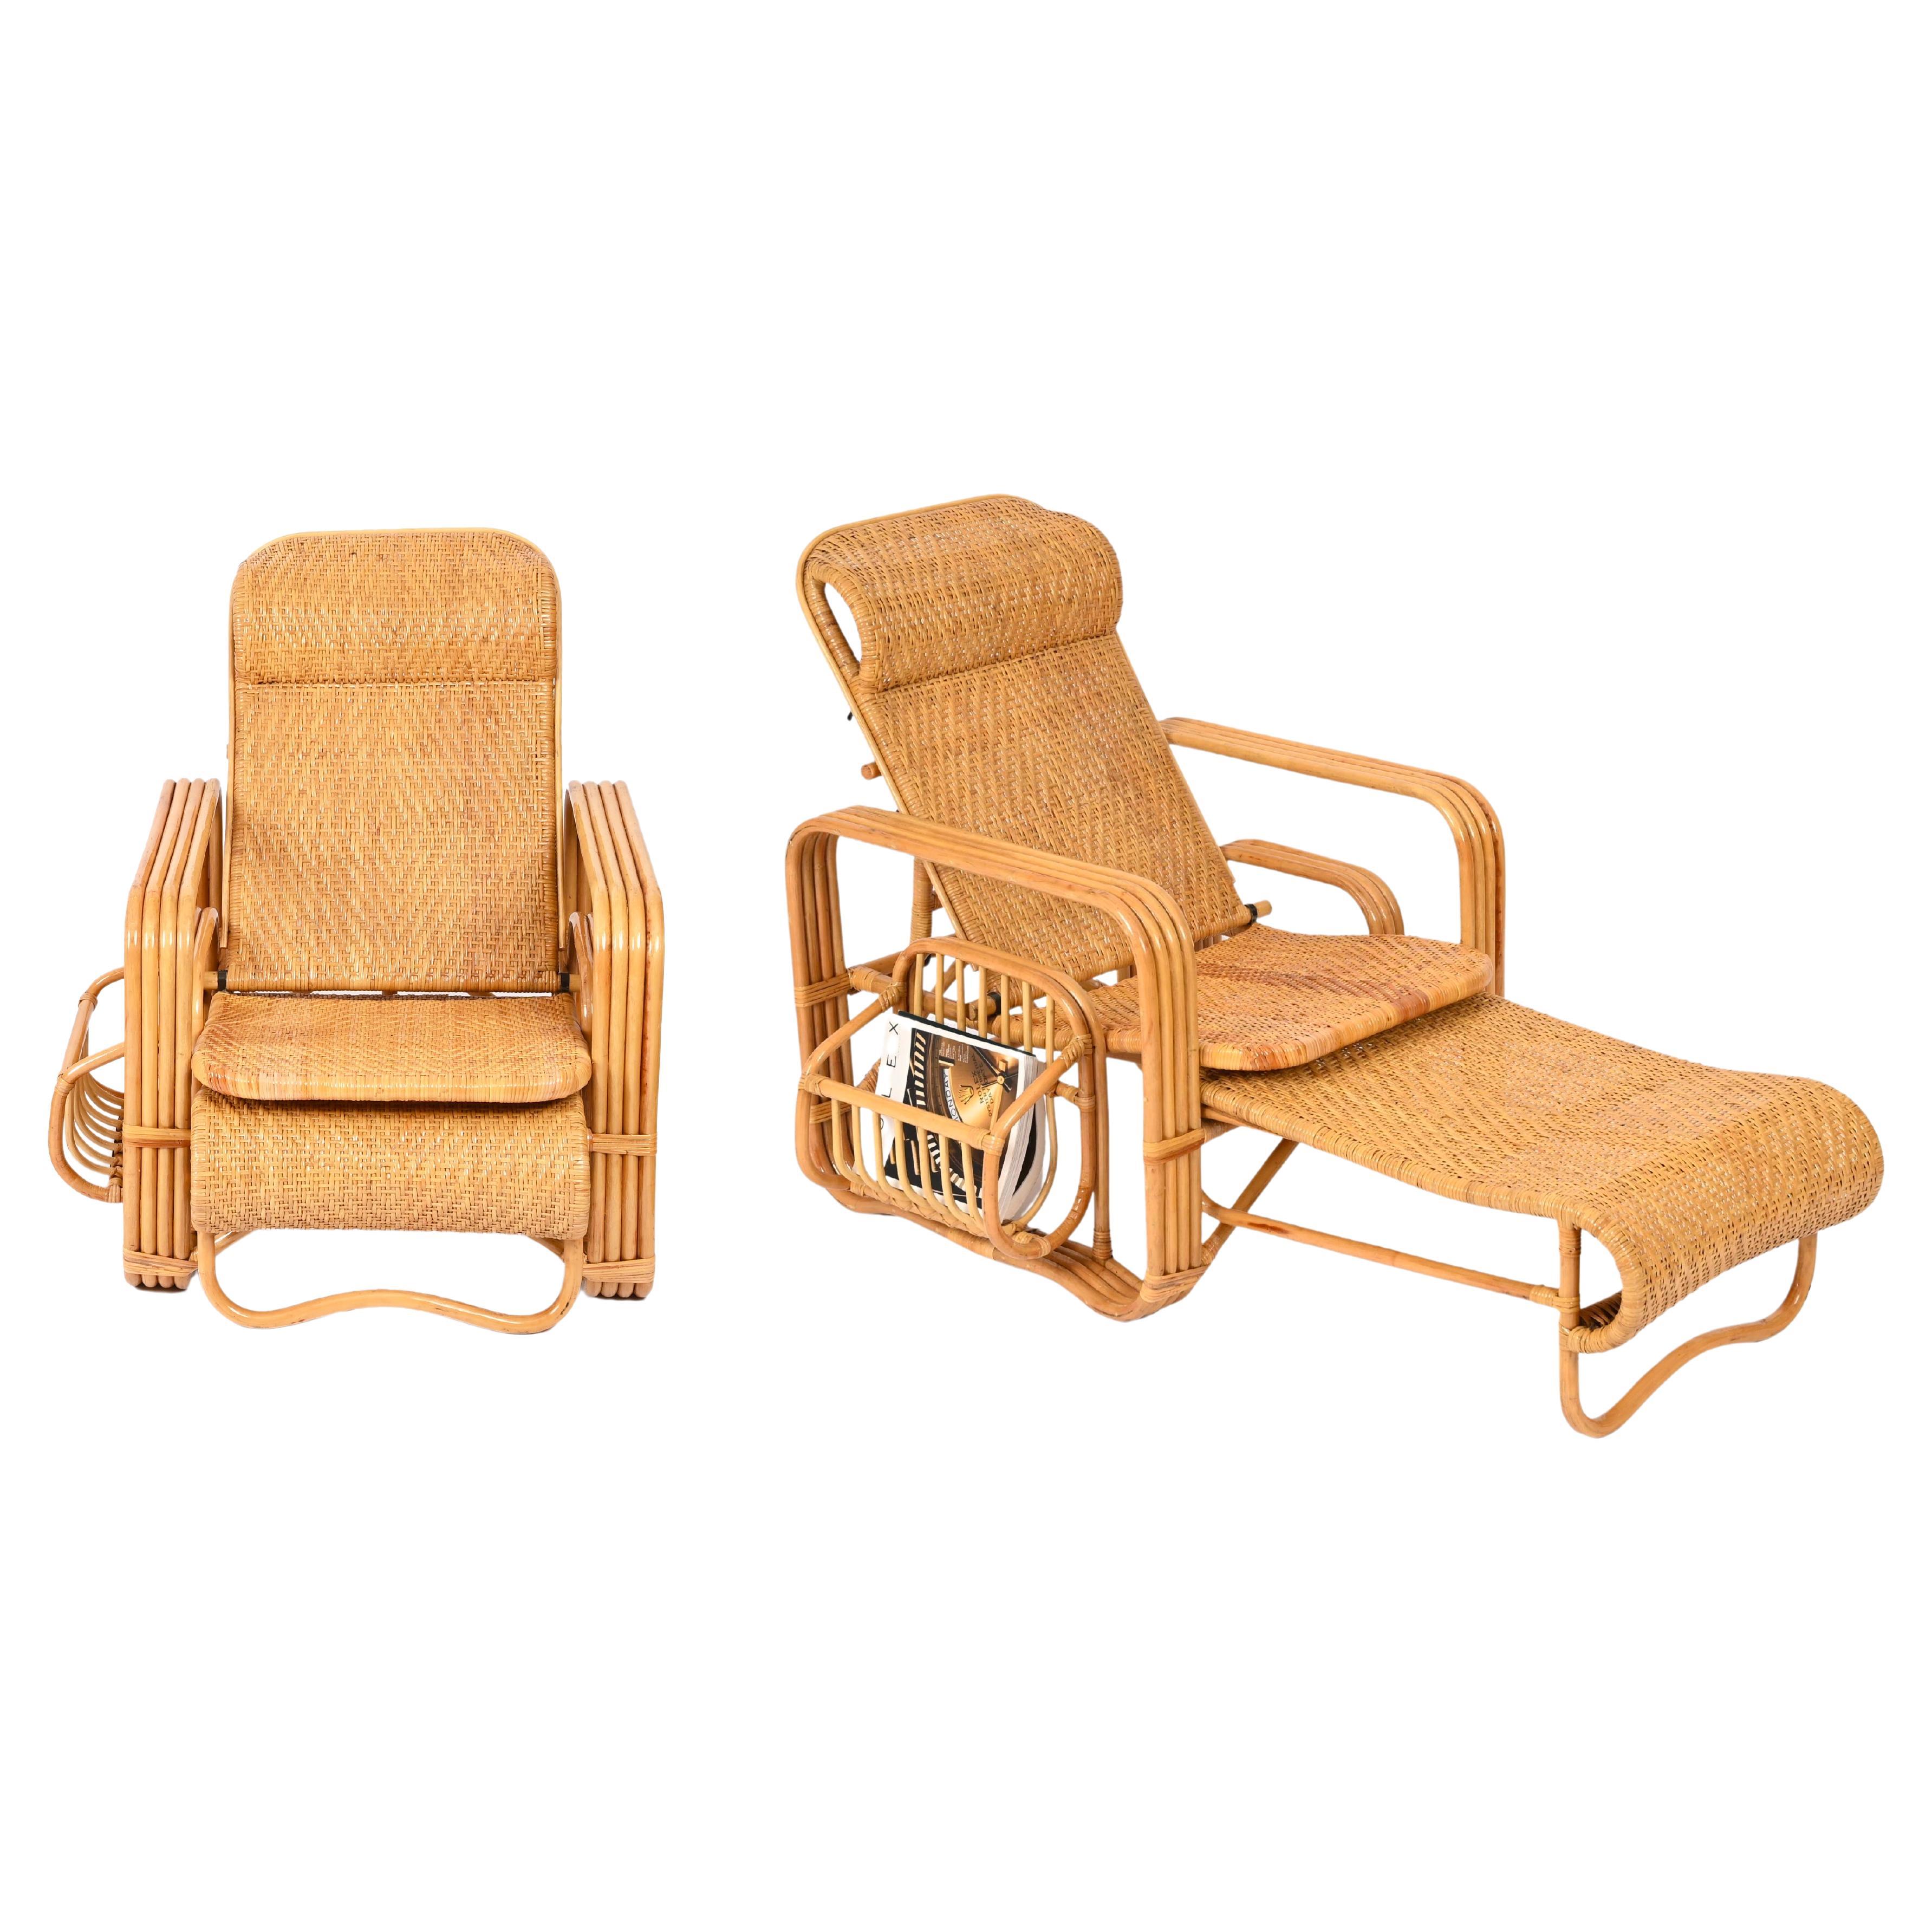 Pair of Adjustable Chaise Longue / Lounge Chairs, Wicker and Rattan, Italy '70s 